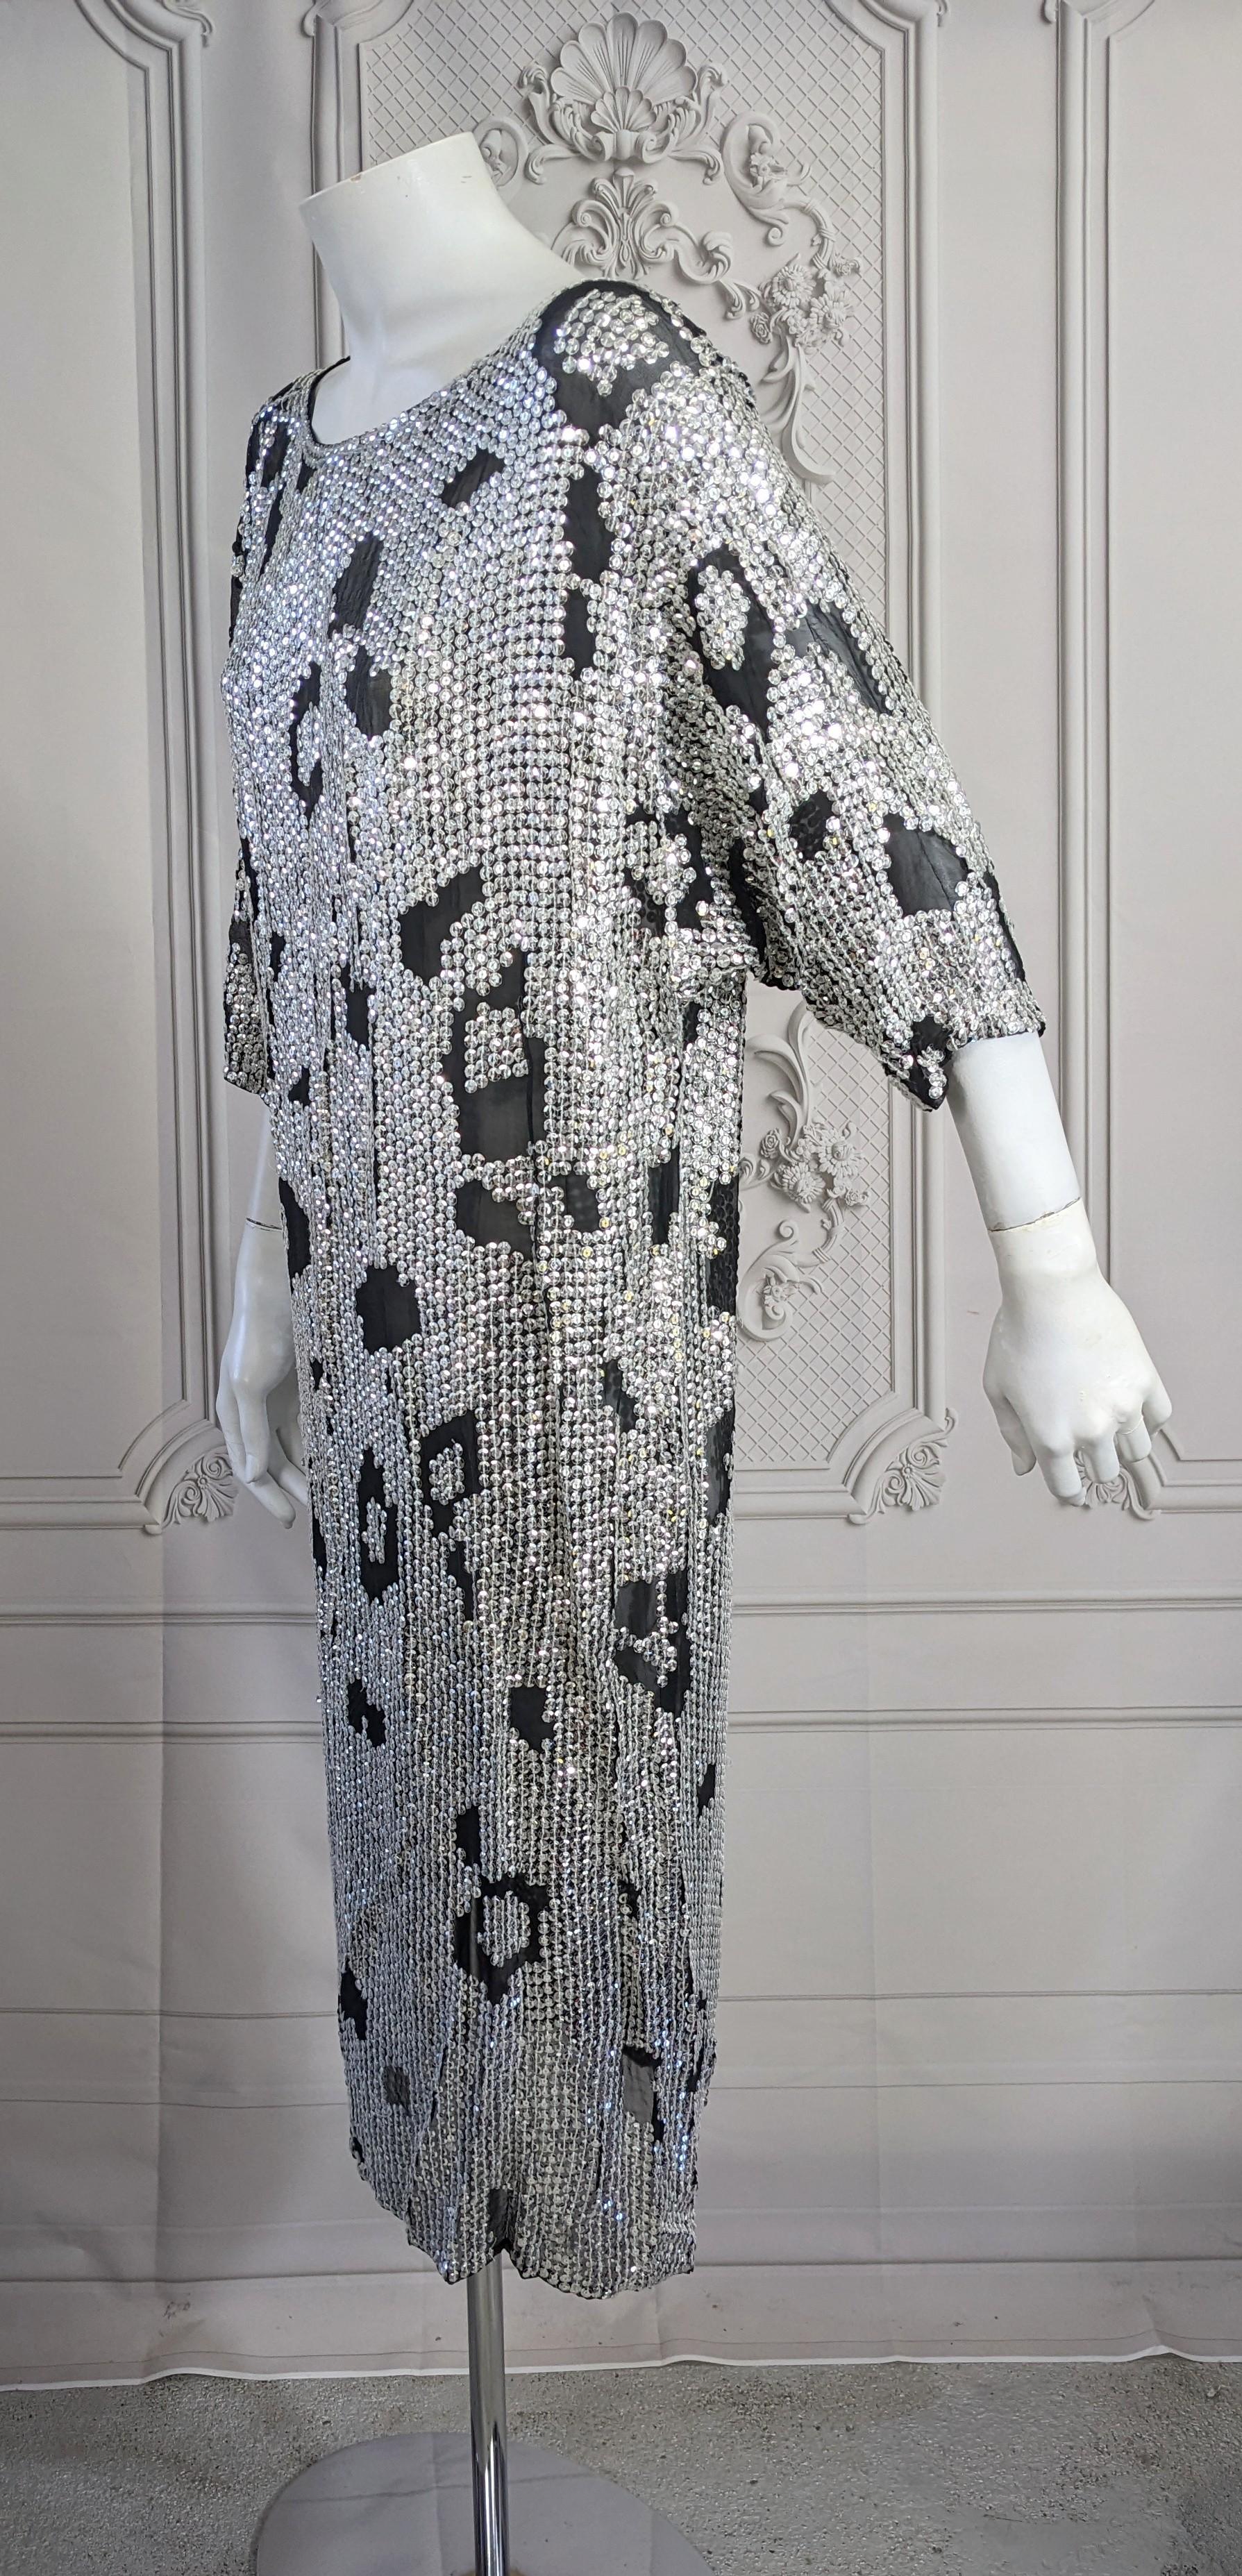 Silk Chiffon Animal Motif Sequin Dress In Good Condition For Sale In New York, NY